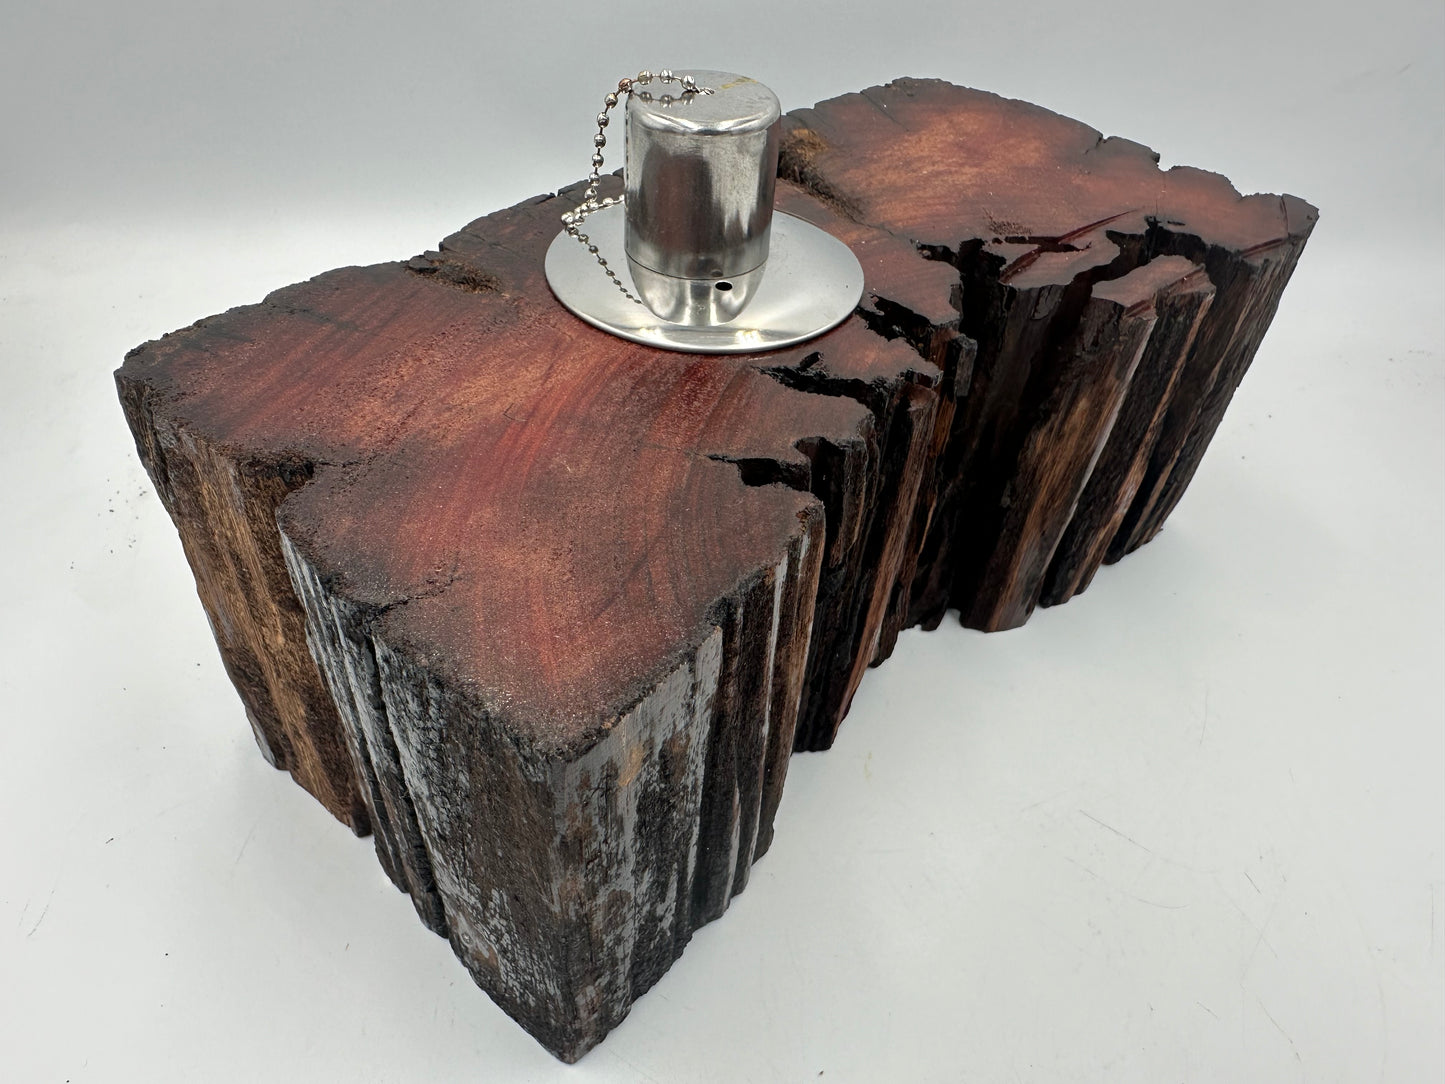 Recycled Wooden Oil Burner Large 56